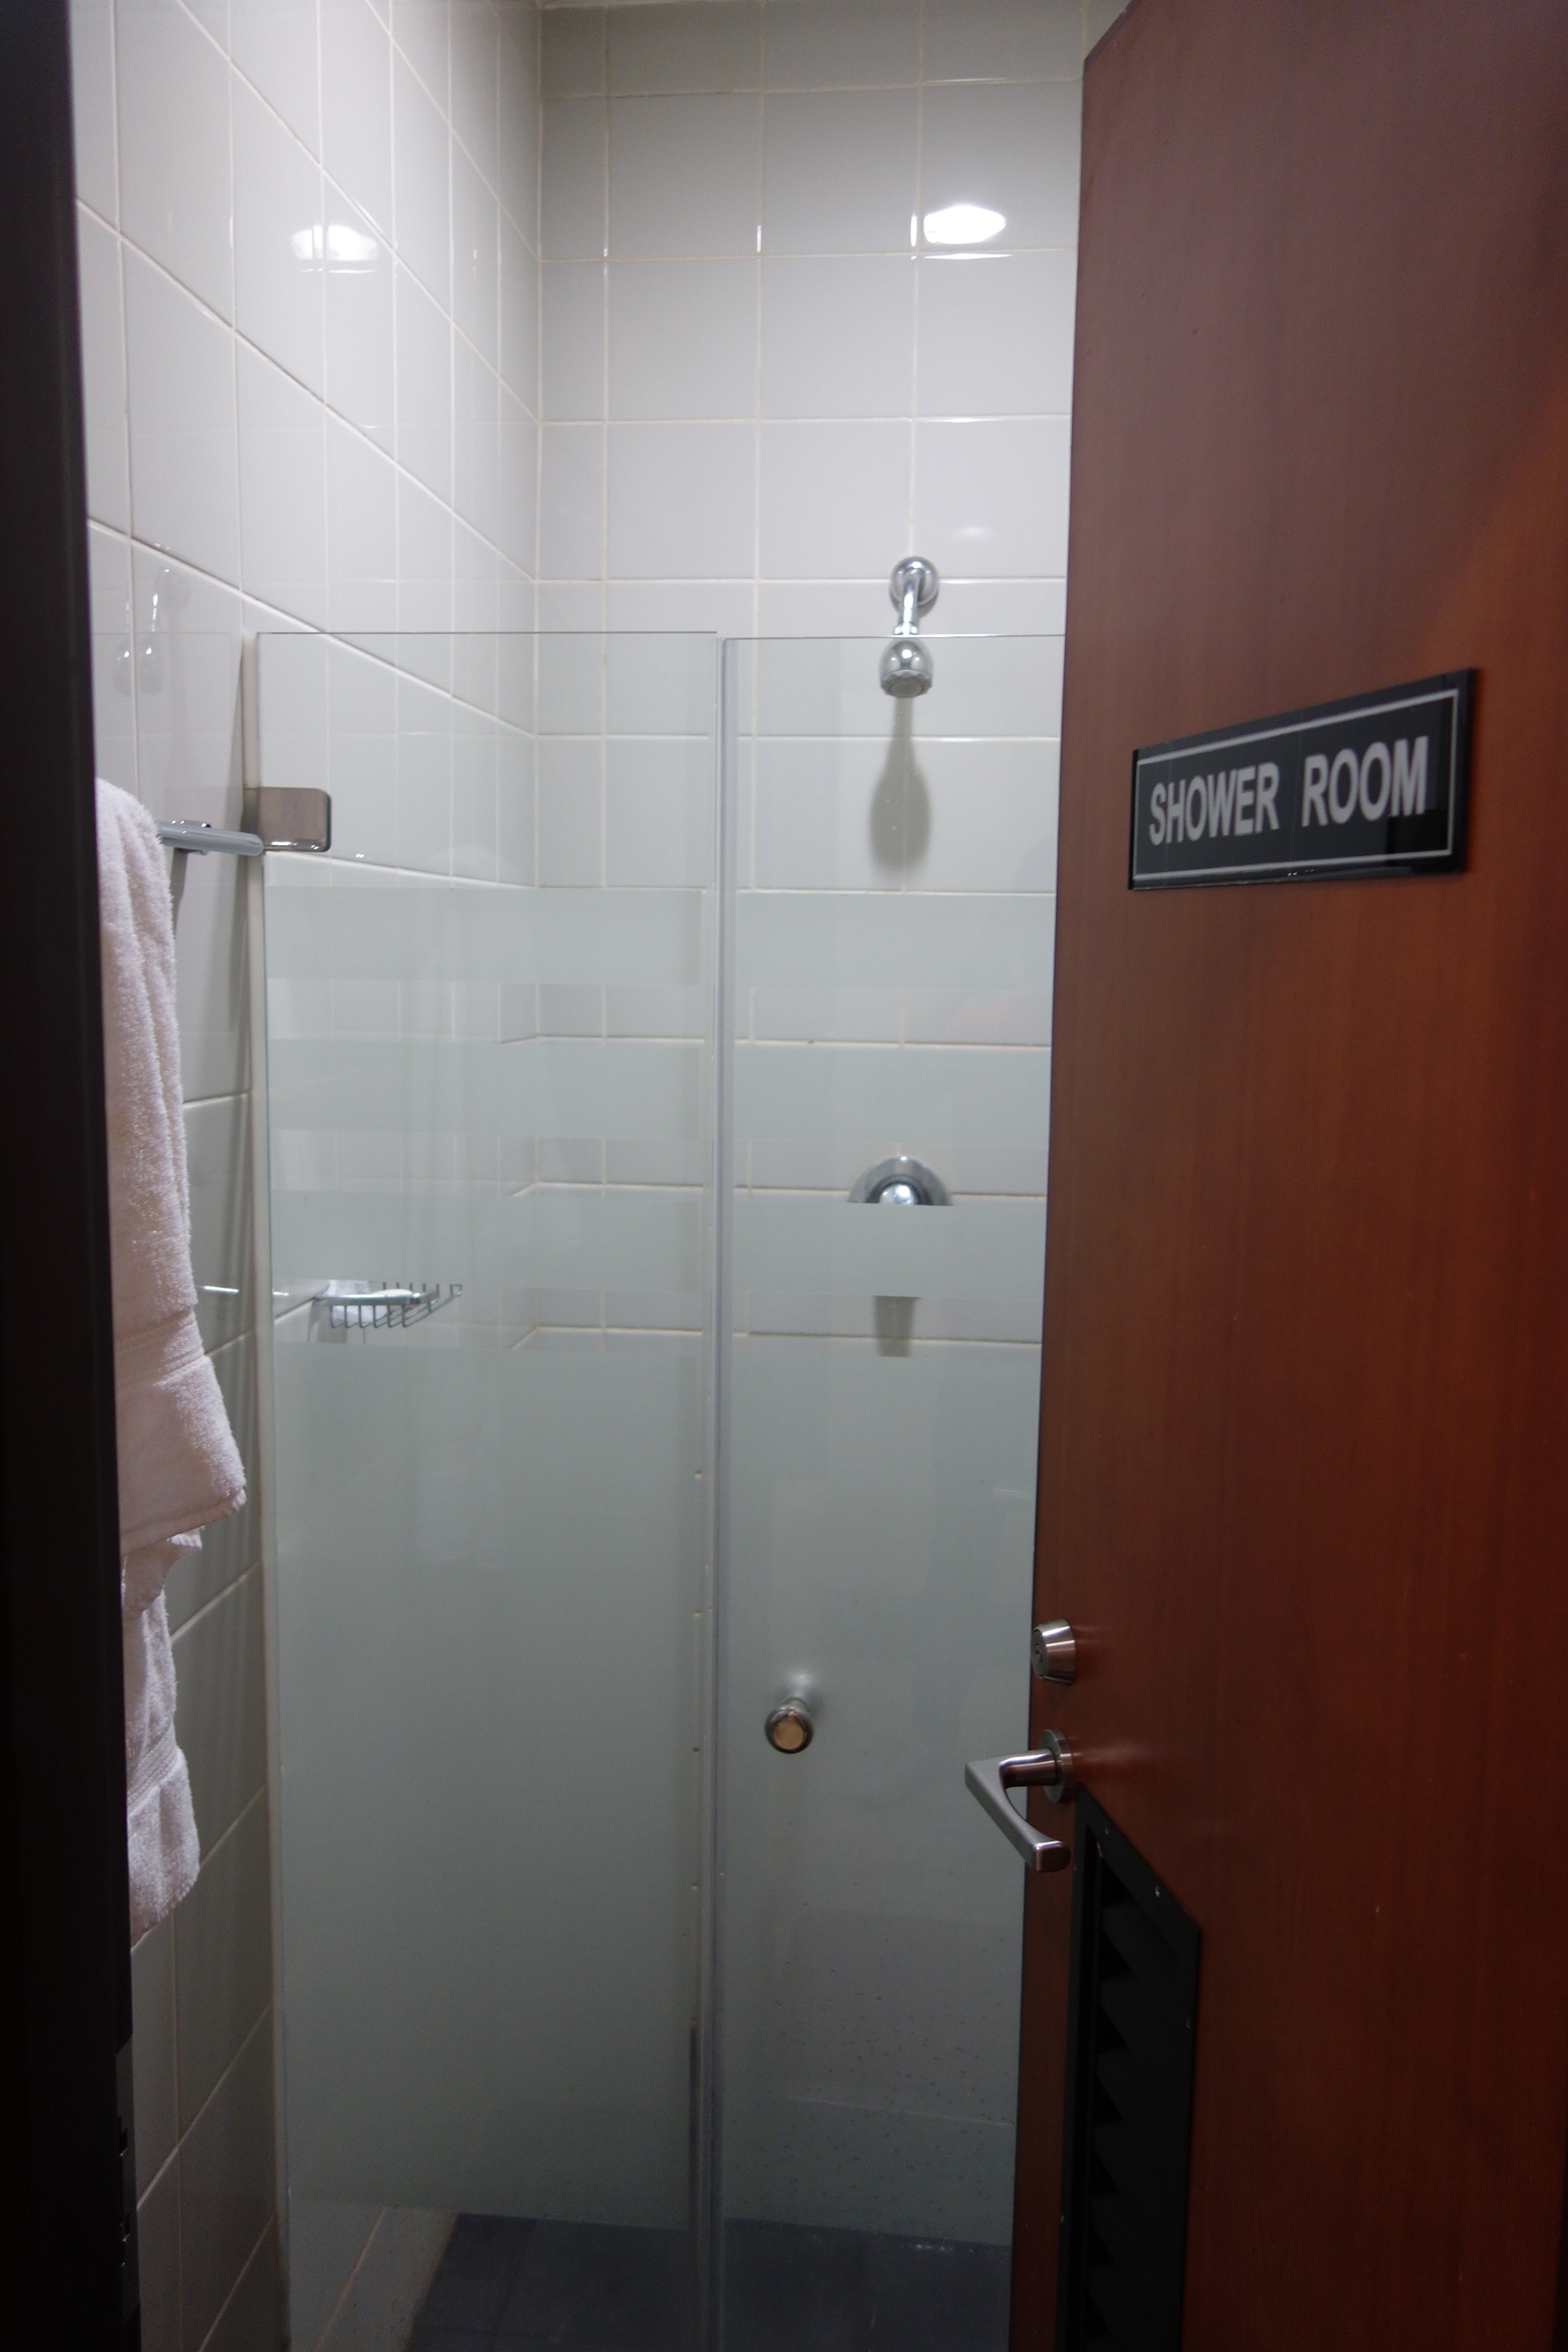 Shower room: can you guess which lounge it's from?